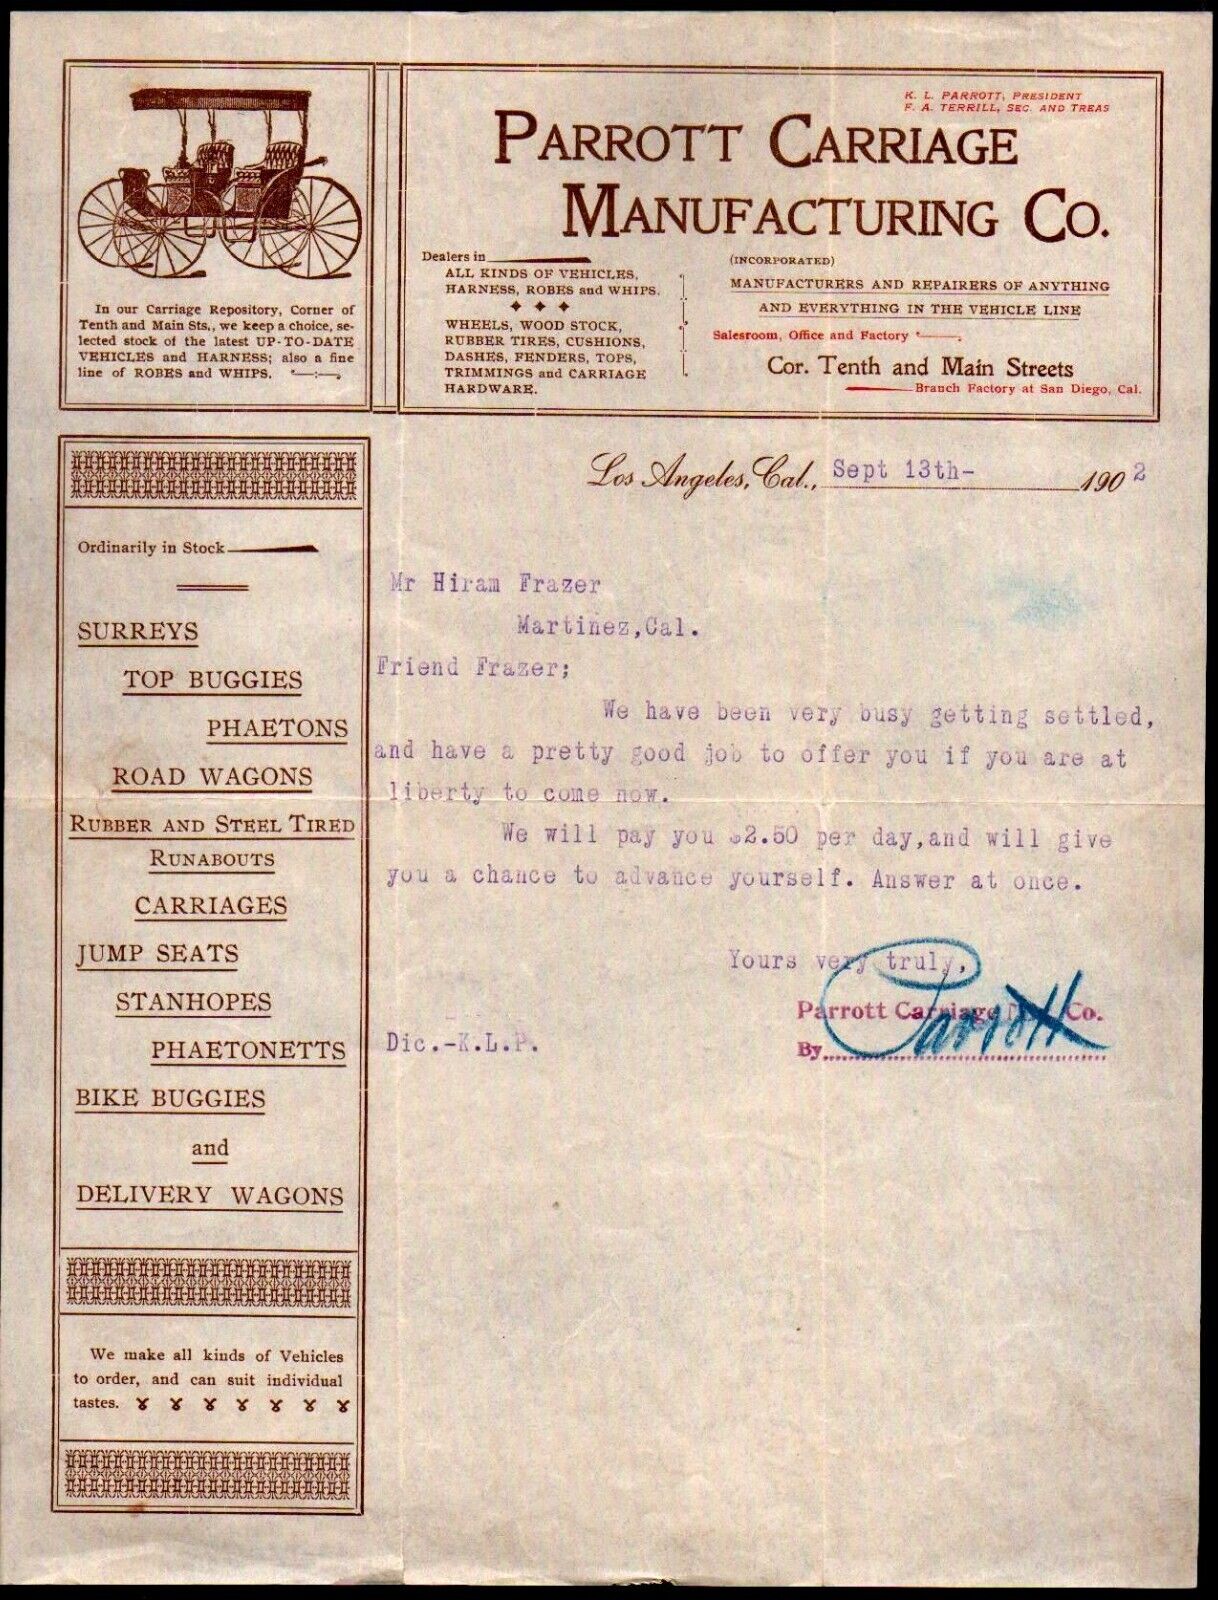 1902 Los Angeles - Parrot Carriage Manufacturing Co - Rare Letter Head Bill